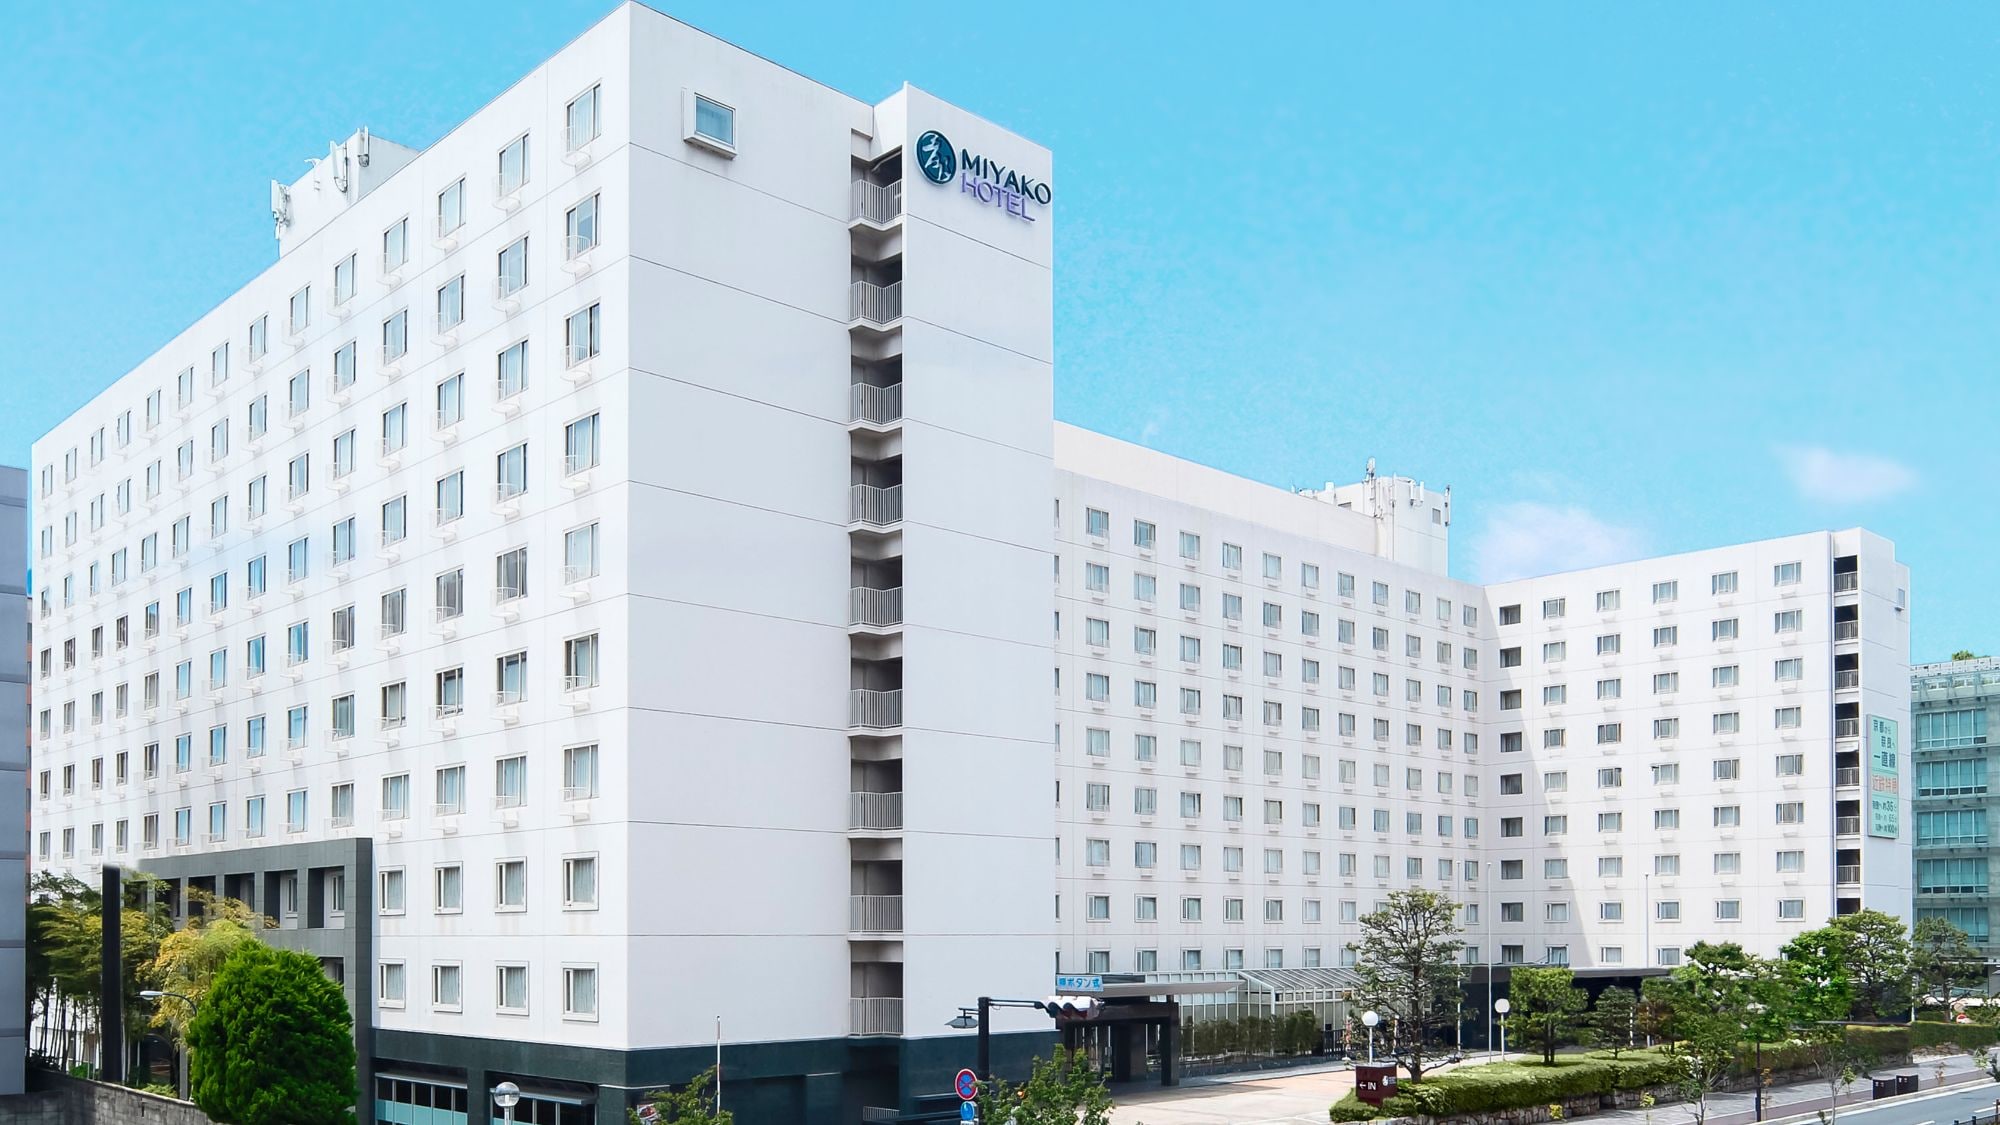 About 2 minutes on foot from Kyoto Station! "Miyako Hotel Kyoto Hachijo"